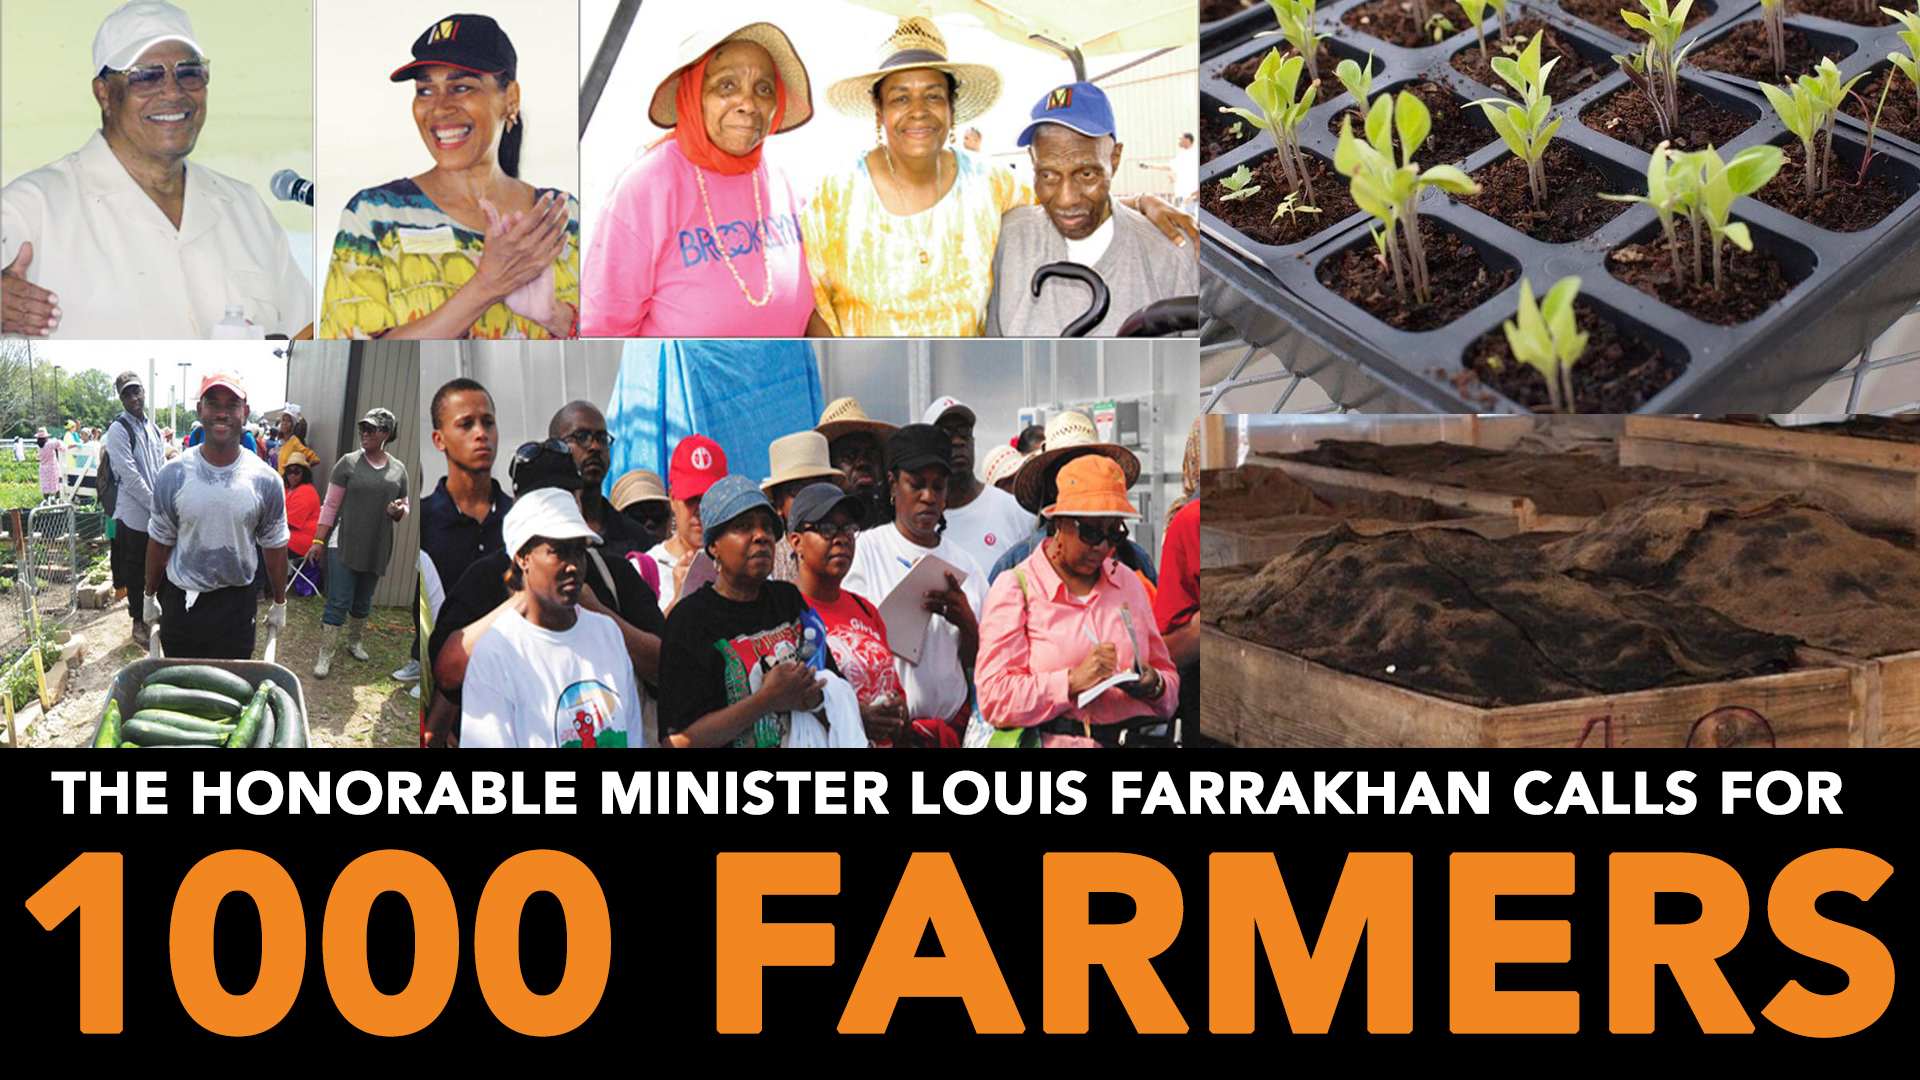 Minister Farrakhan calls for land owners and farmers